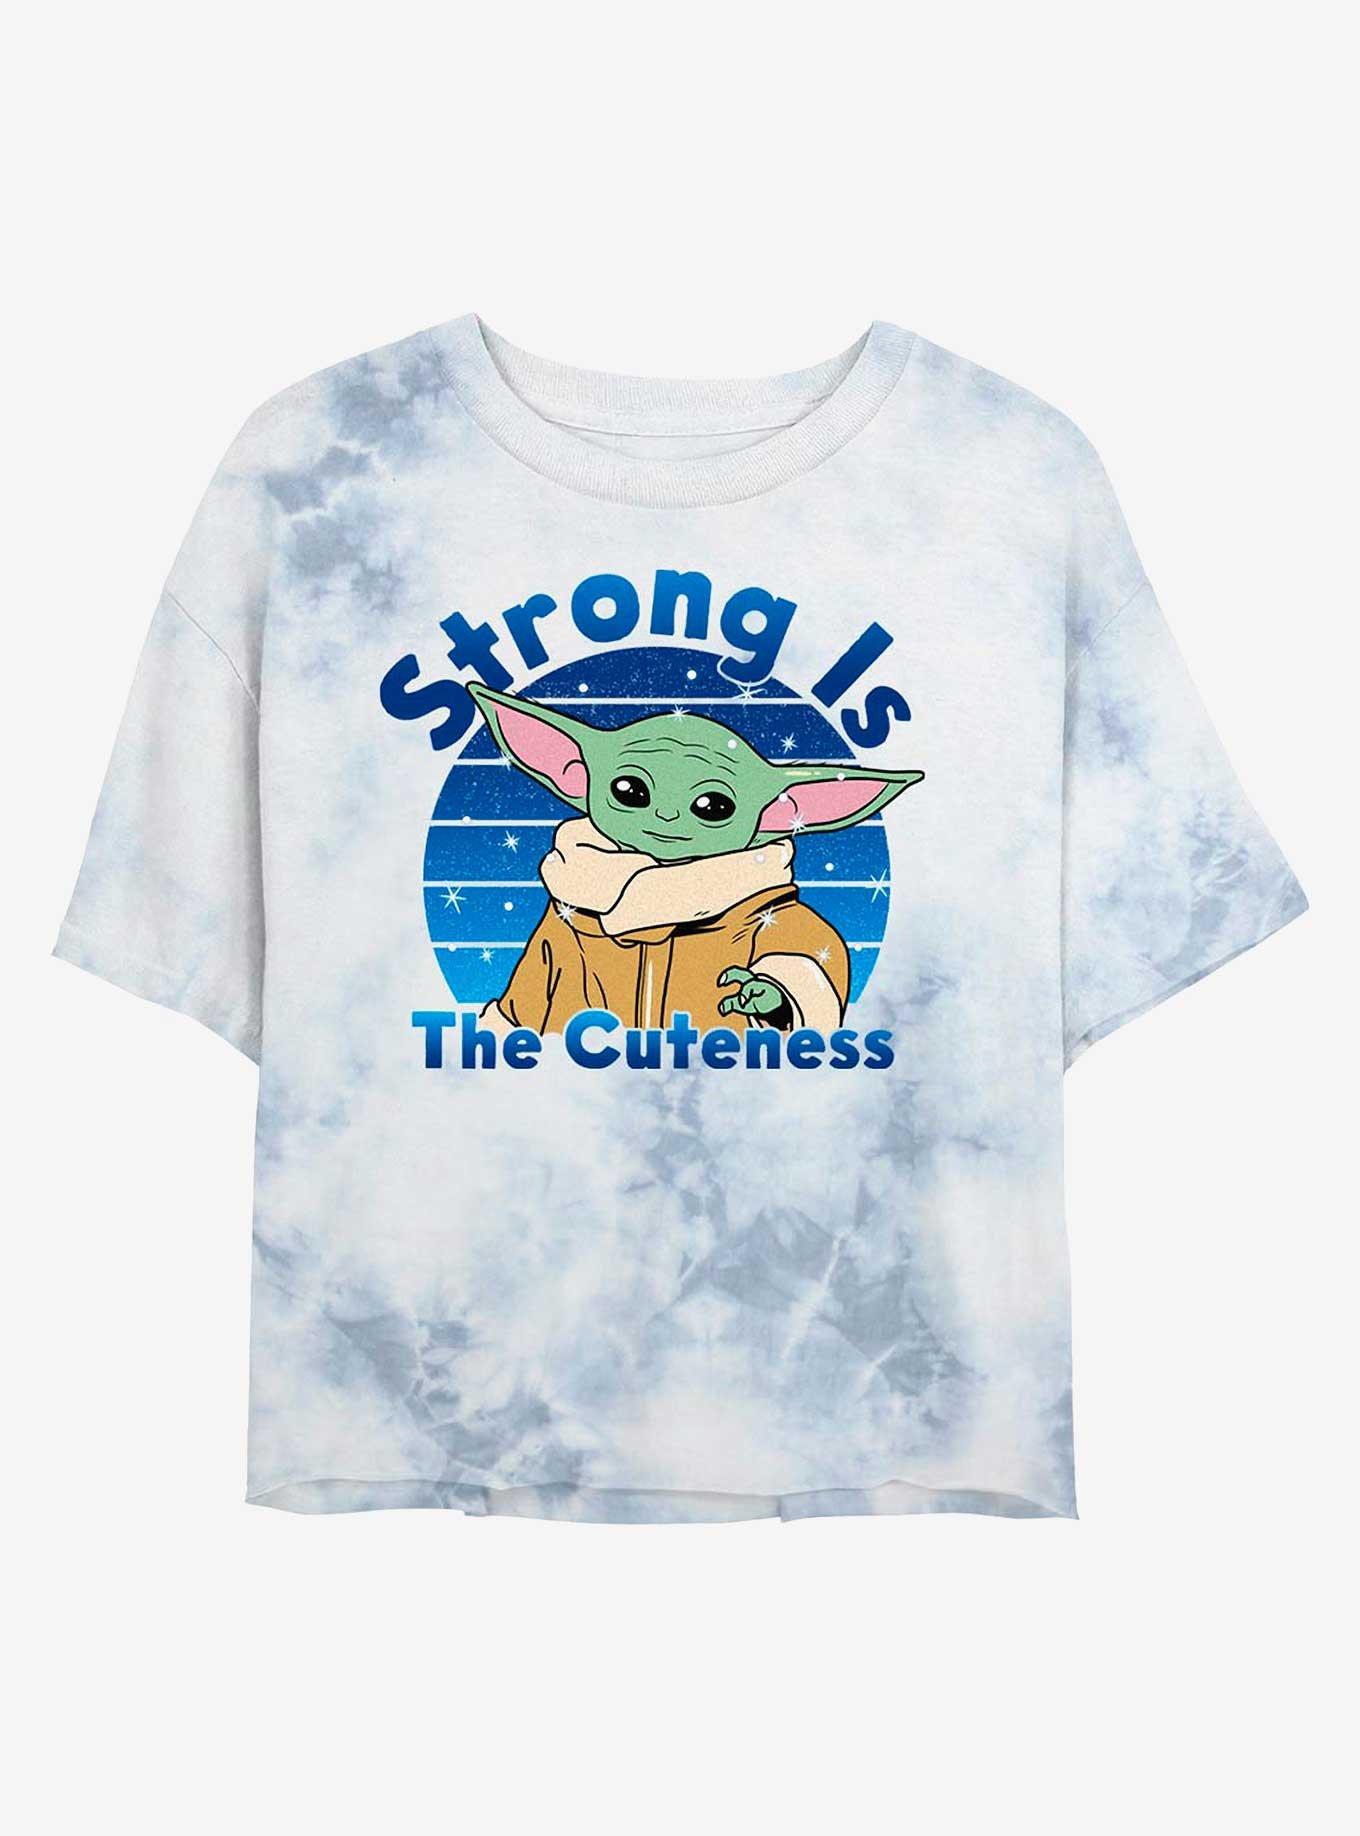 Star Wars The Mandalorian The Child Strong Is The Cuteness Tie-Dye Womens Crop T-Shirt, WHITEBLUE, hi-res